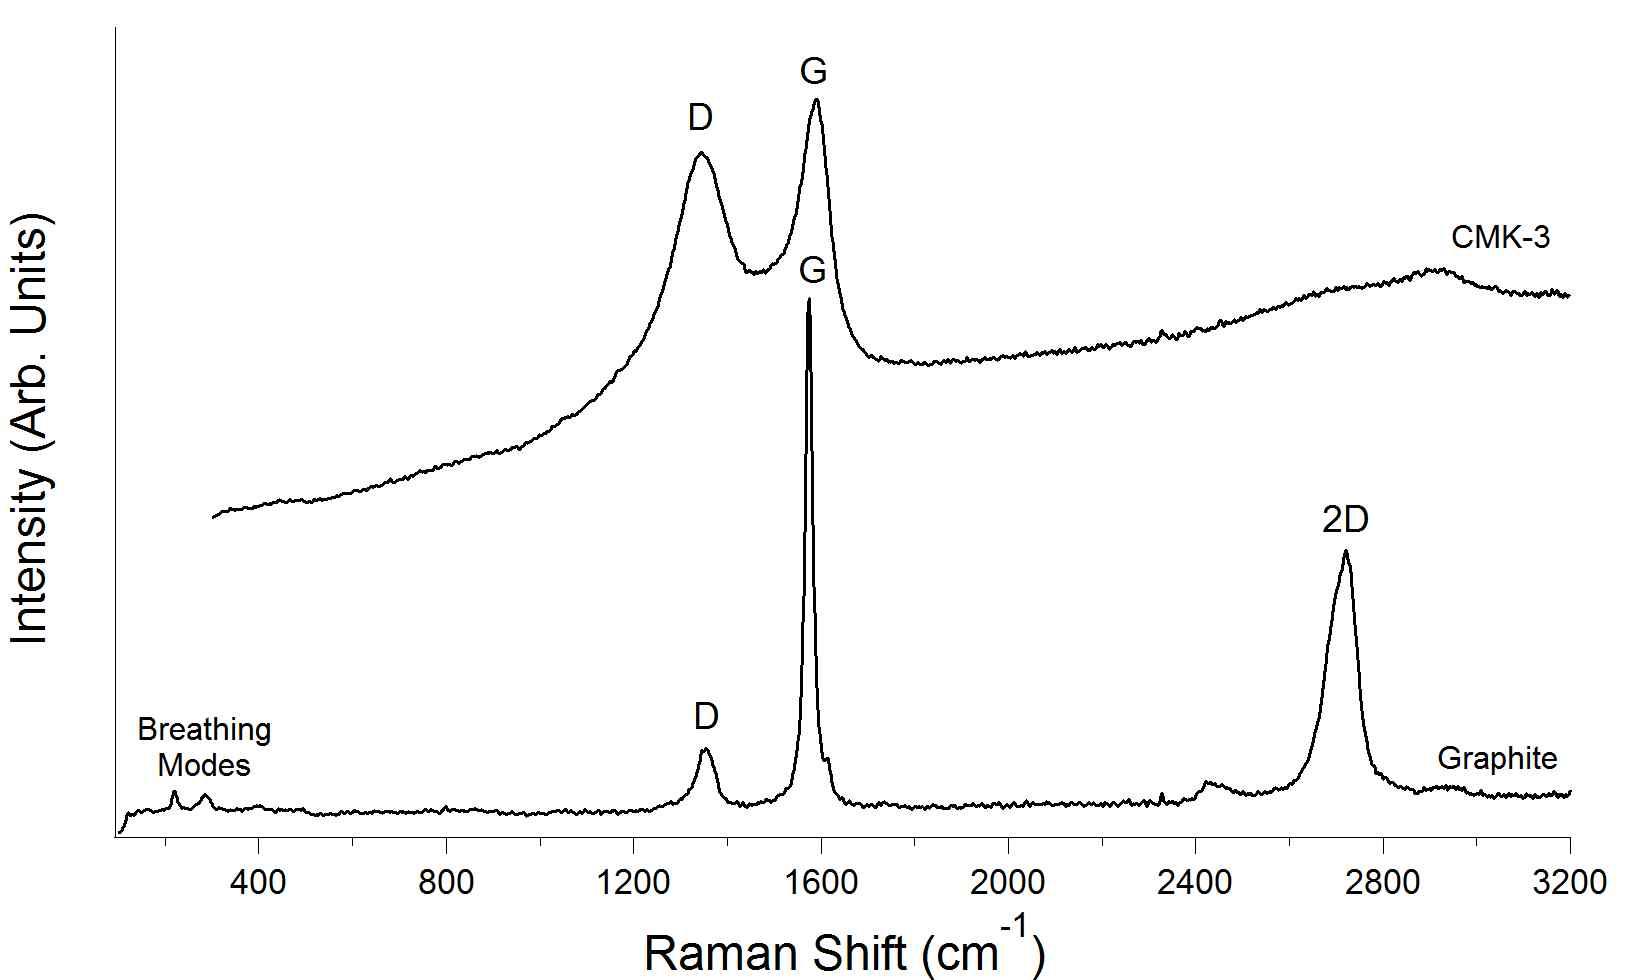 Raman spectra of as received CMK-3 and Graphite